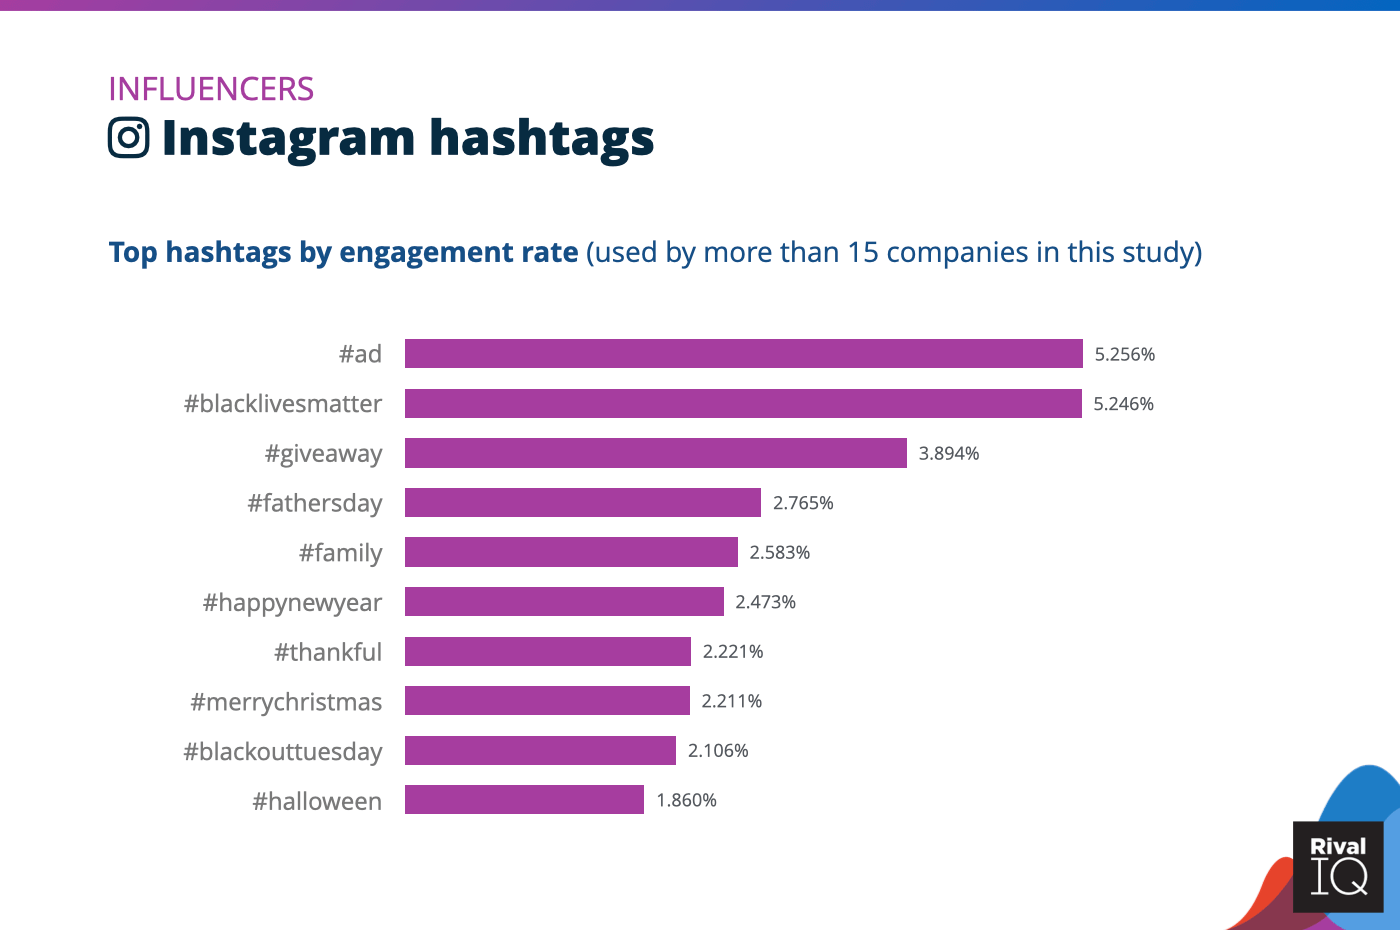 Chart of Top Instagram hashtags by engagement rate, Influencers